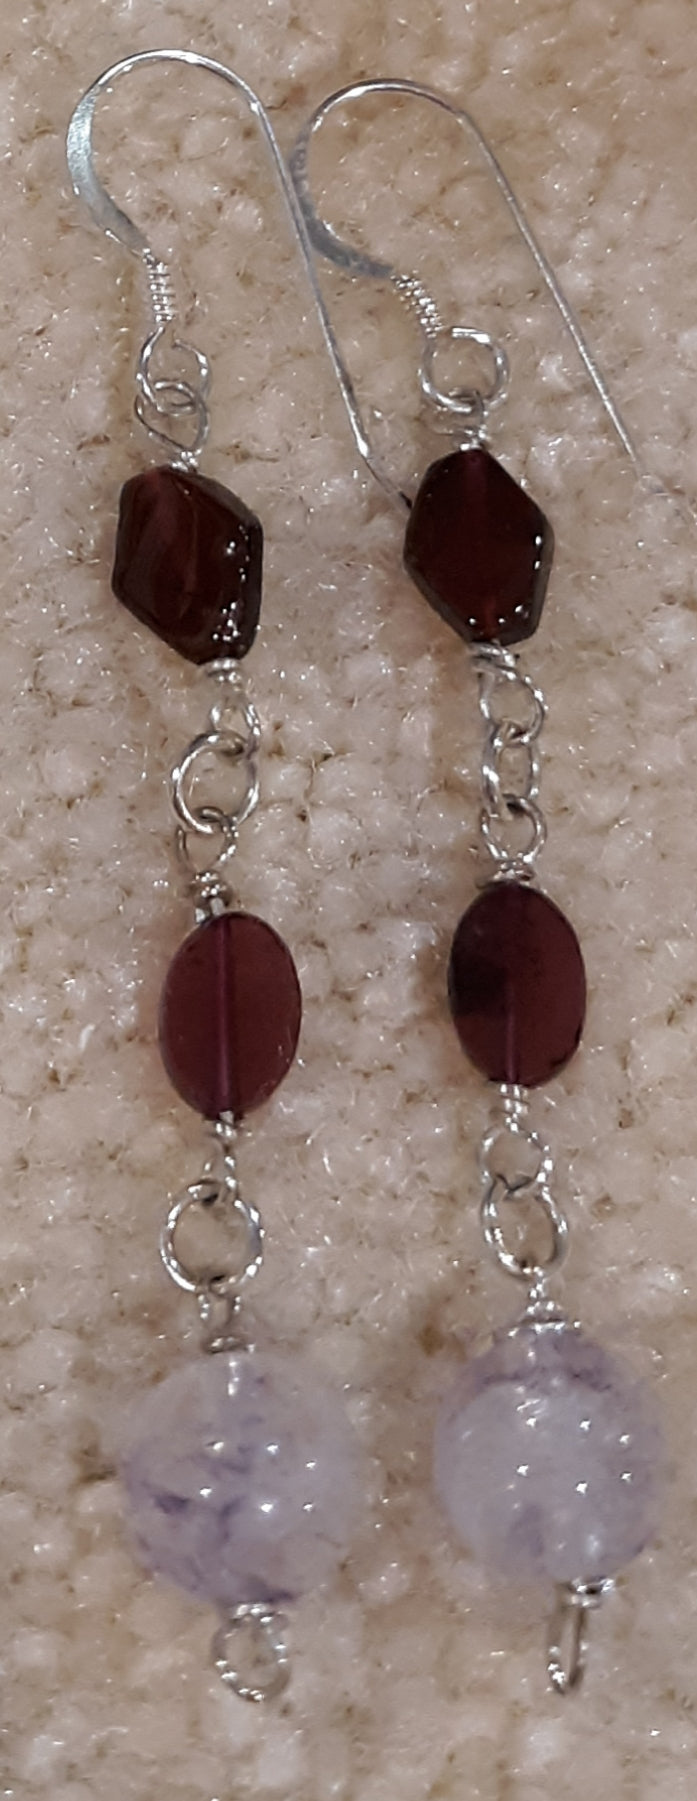 Garnet and Crackled Quartz Sterling Silver Dangle Earrings approx. 2 1/2"